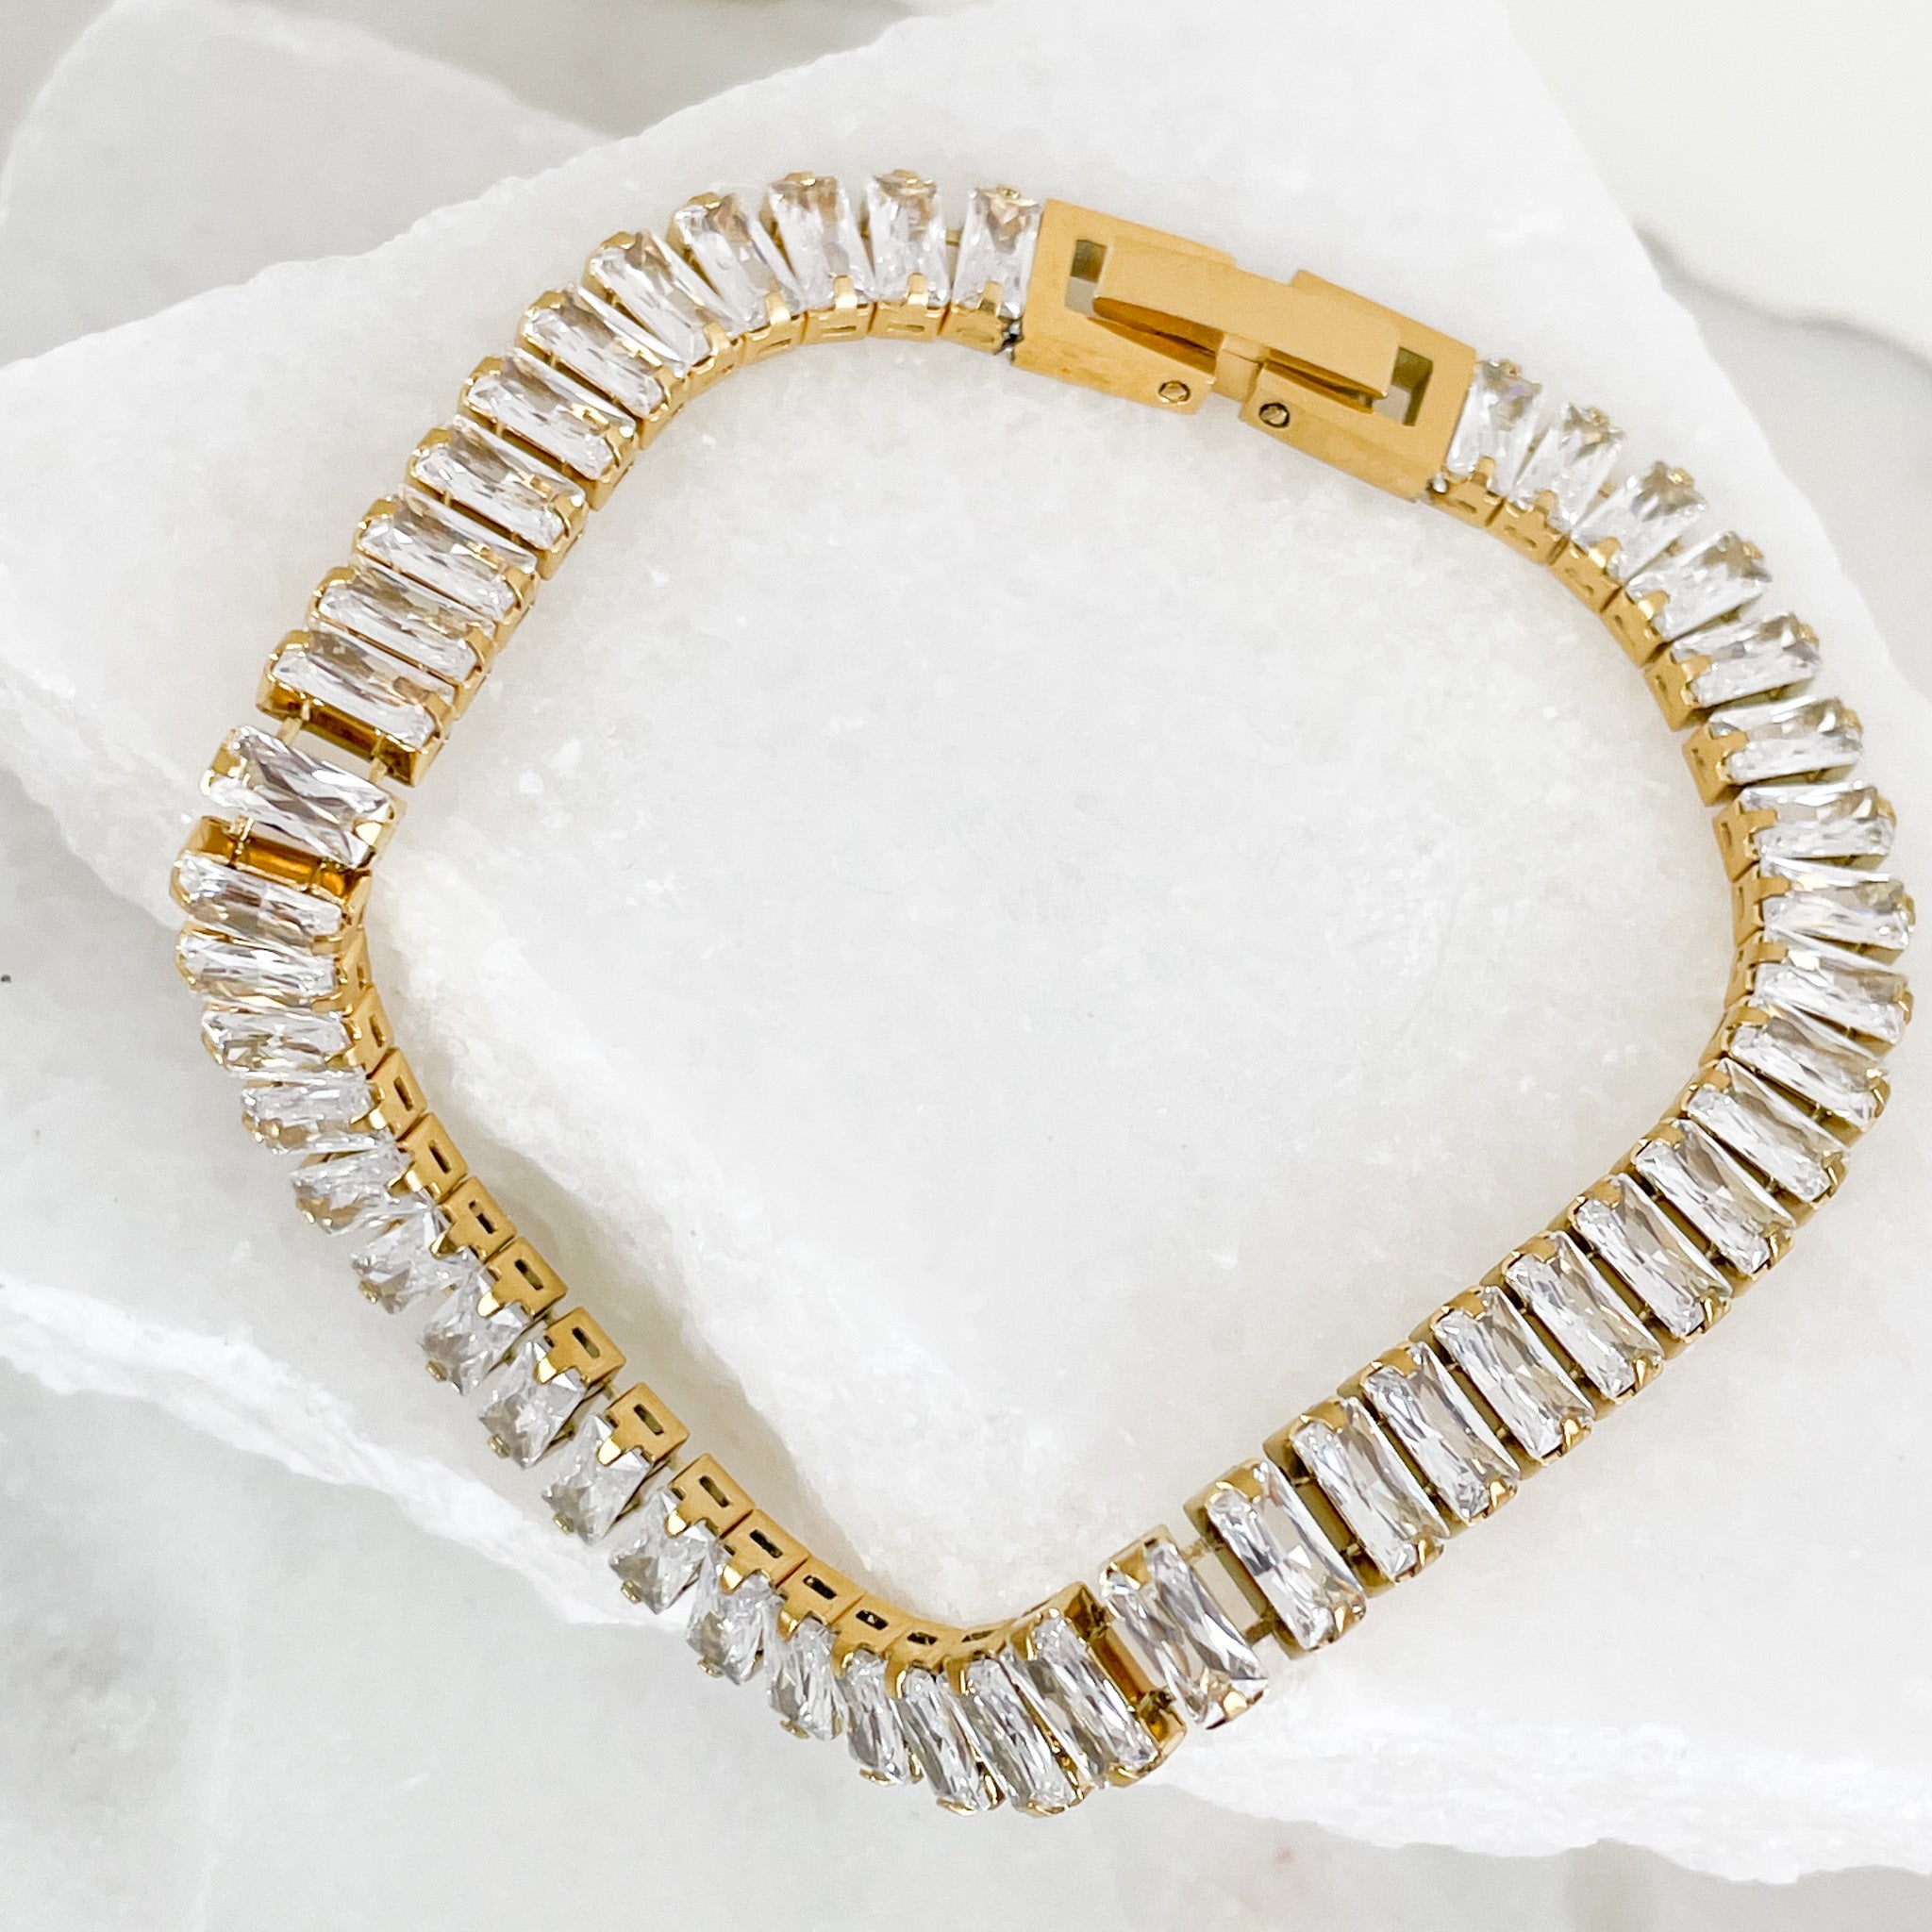 Baguette-cut cubic zirconia brings glamorous sparkle to an elegant tennis bracelet finished in 18K PVD Gold Plated